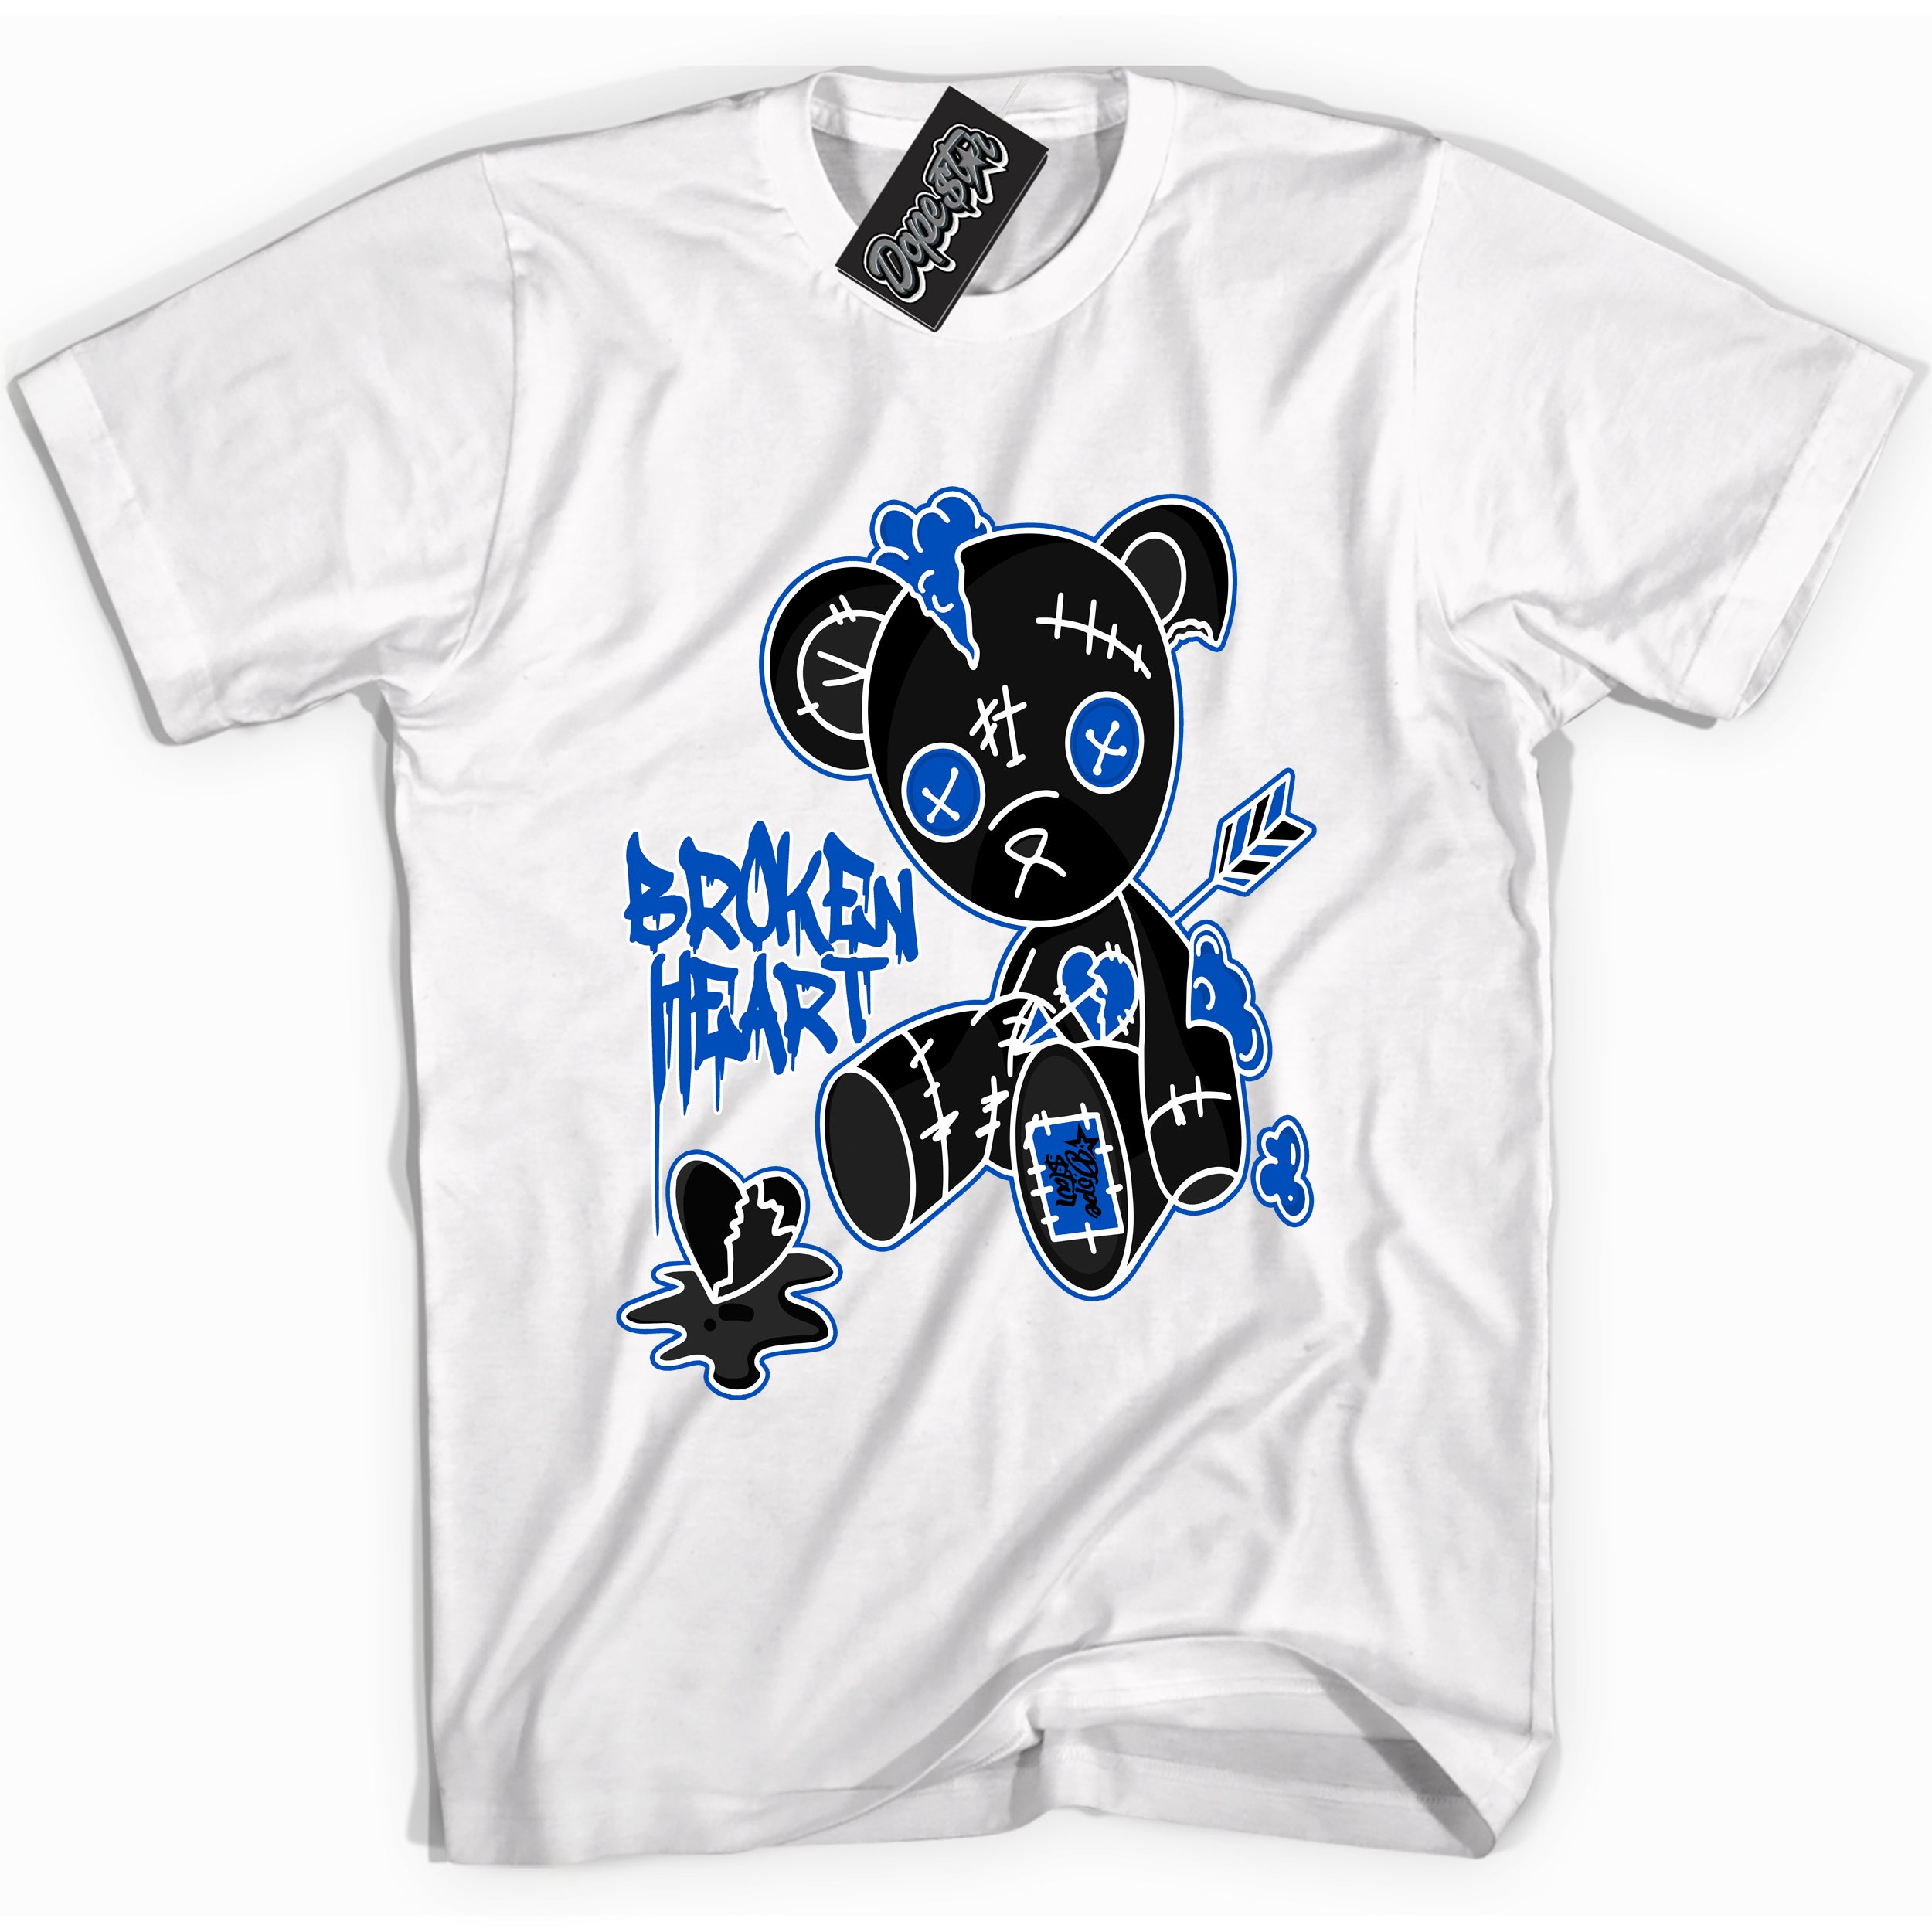 Cool White graphic tee with Broken Heart Bear  print, that perfectly matches OG Royal Reimagined 1s sneakers 